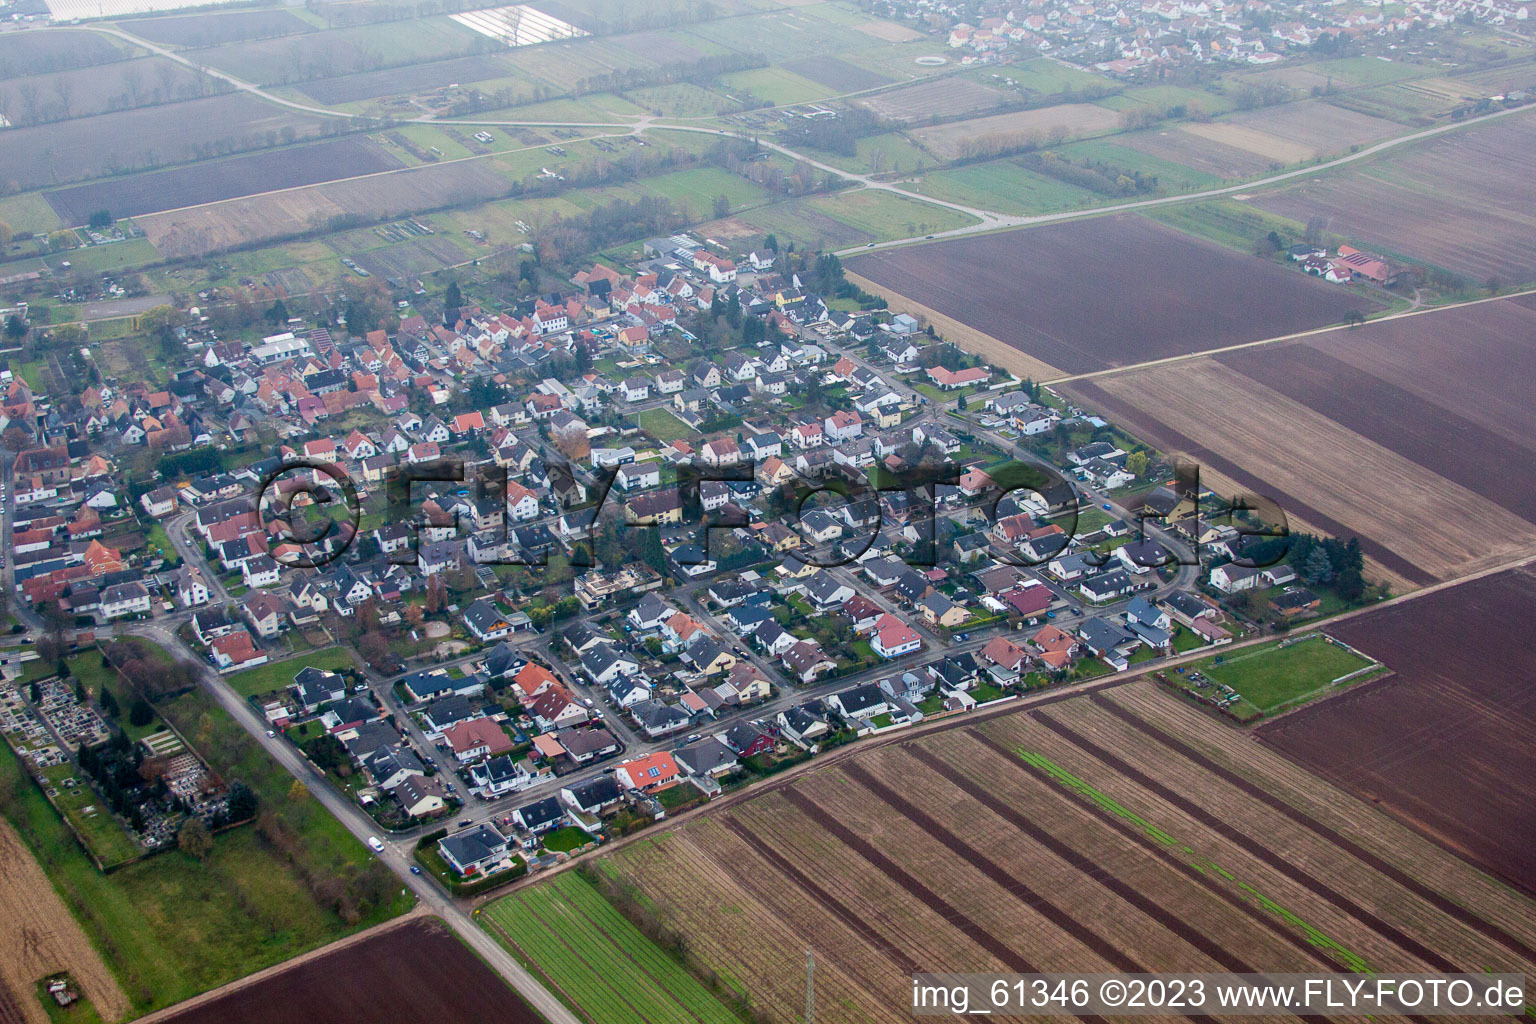 Lustadt in the state Rhineland-Palatinate, Germany seen from above